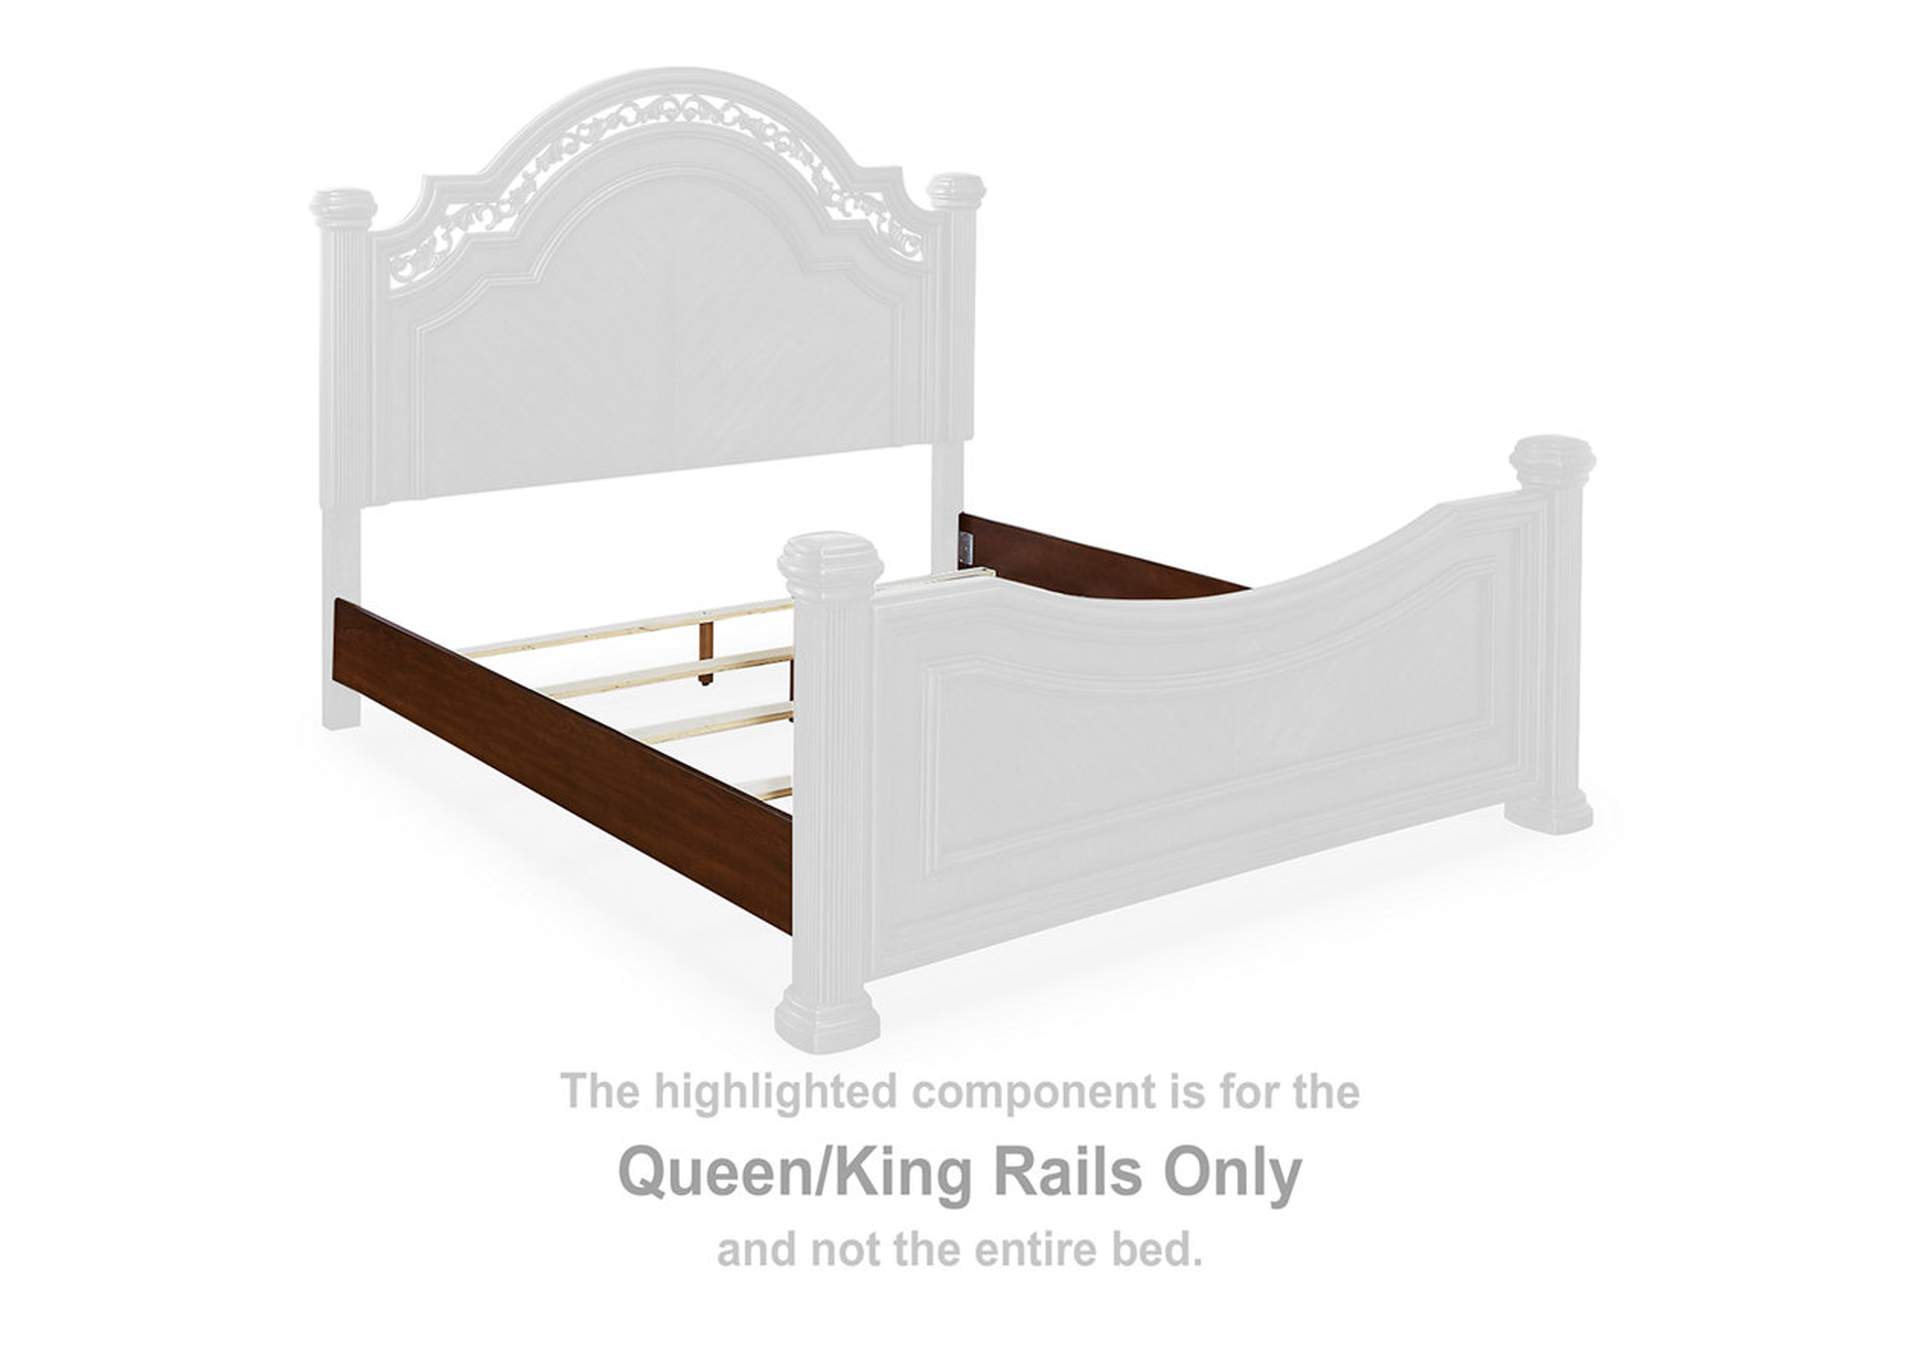 Lavinton Queen Poster Bed,Signature Design By Ashley